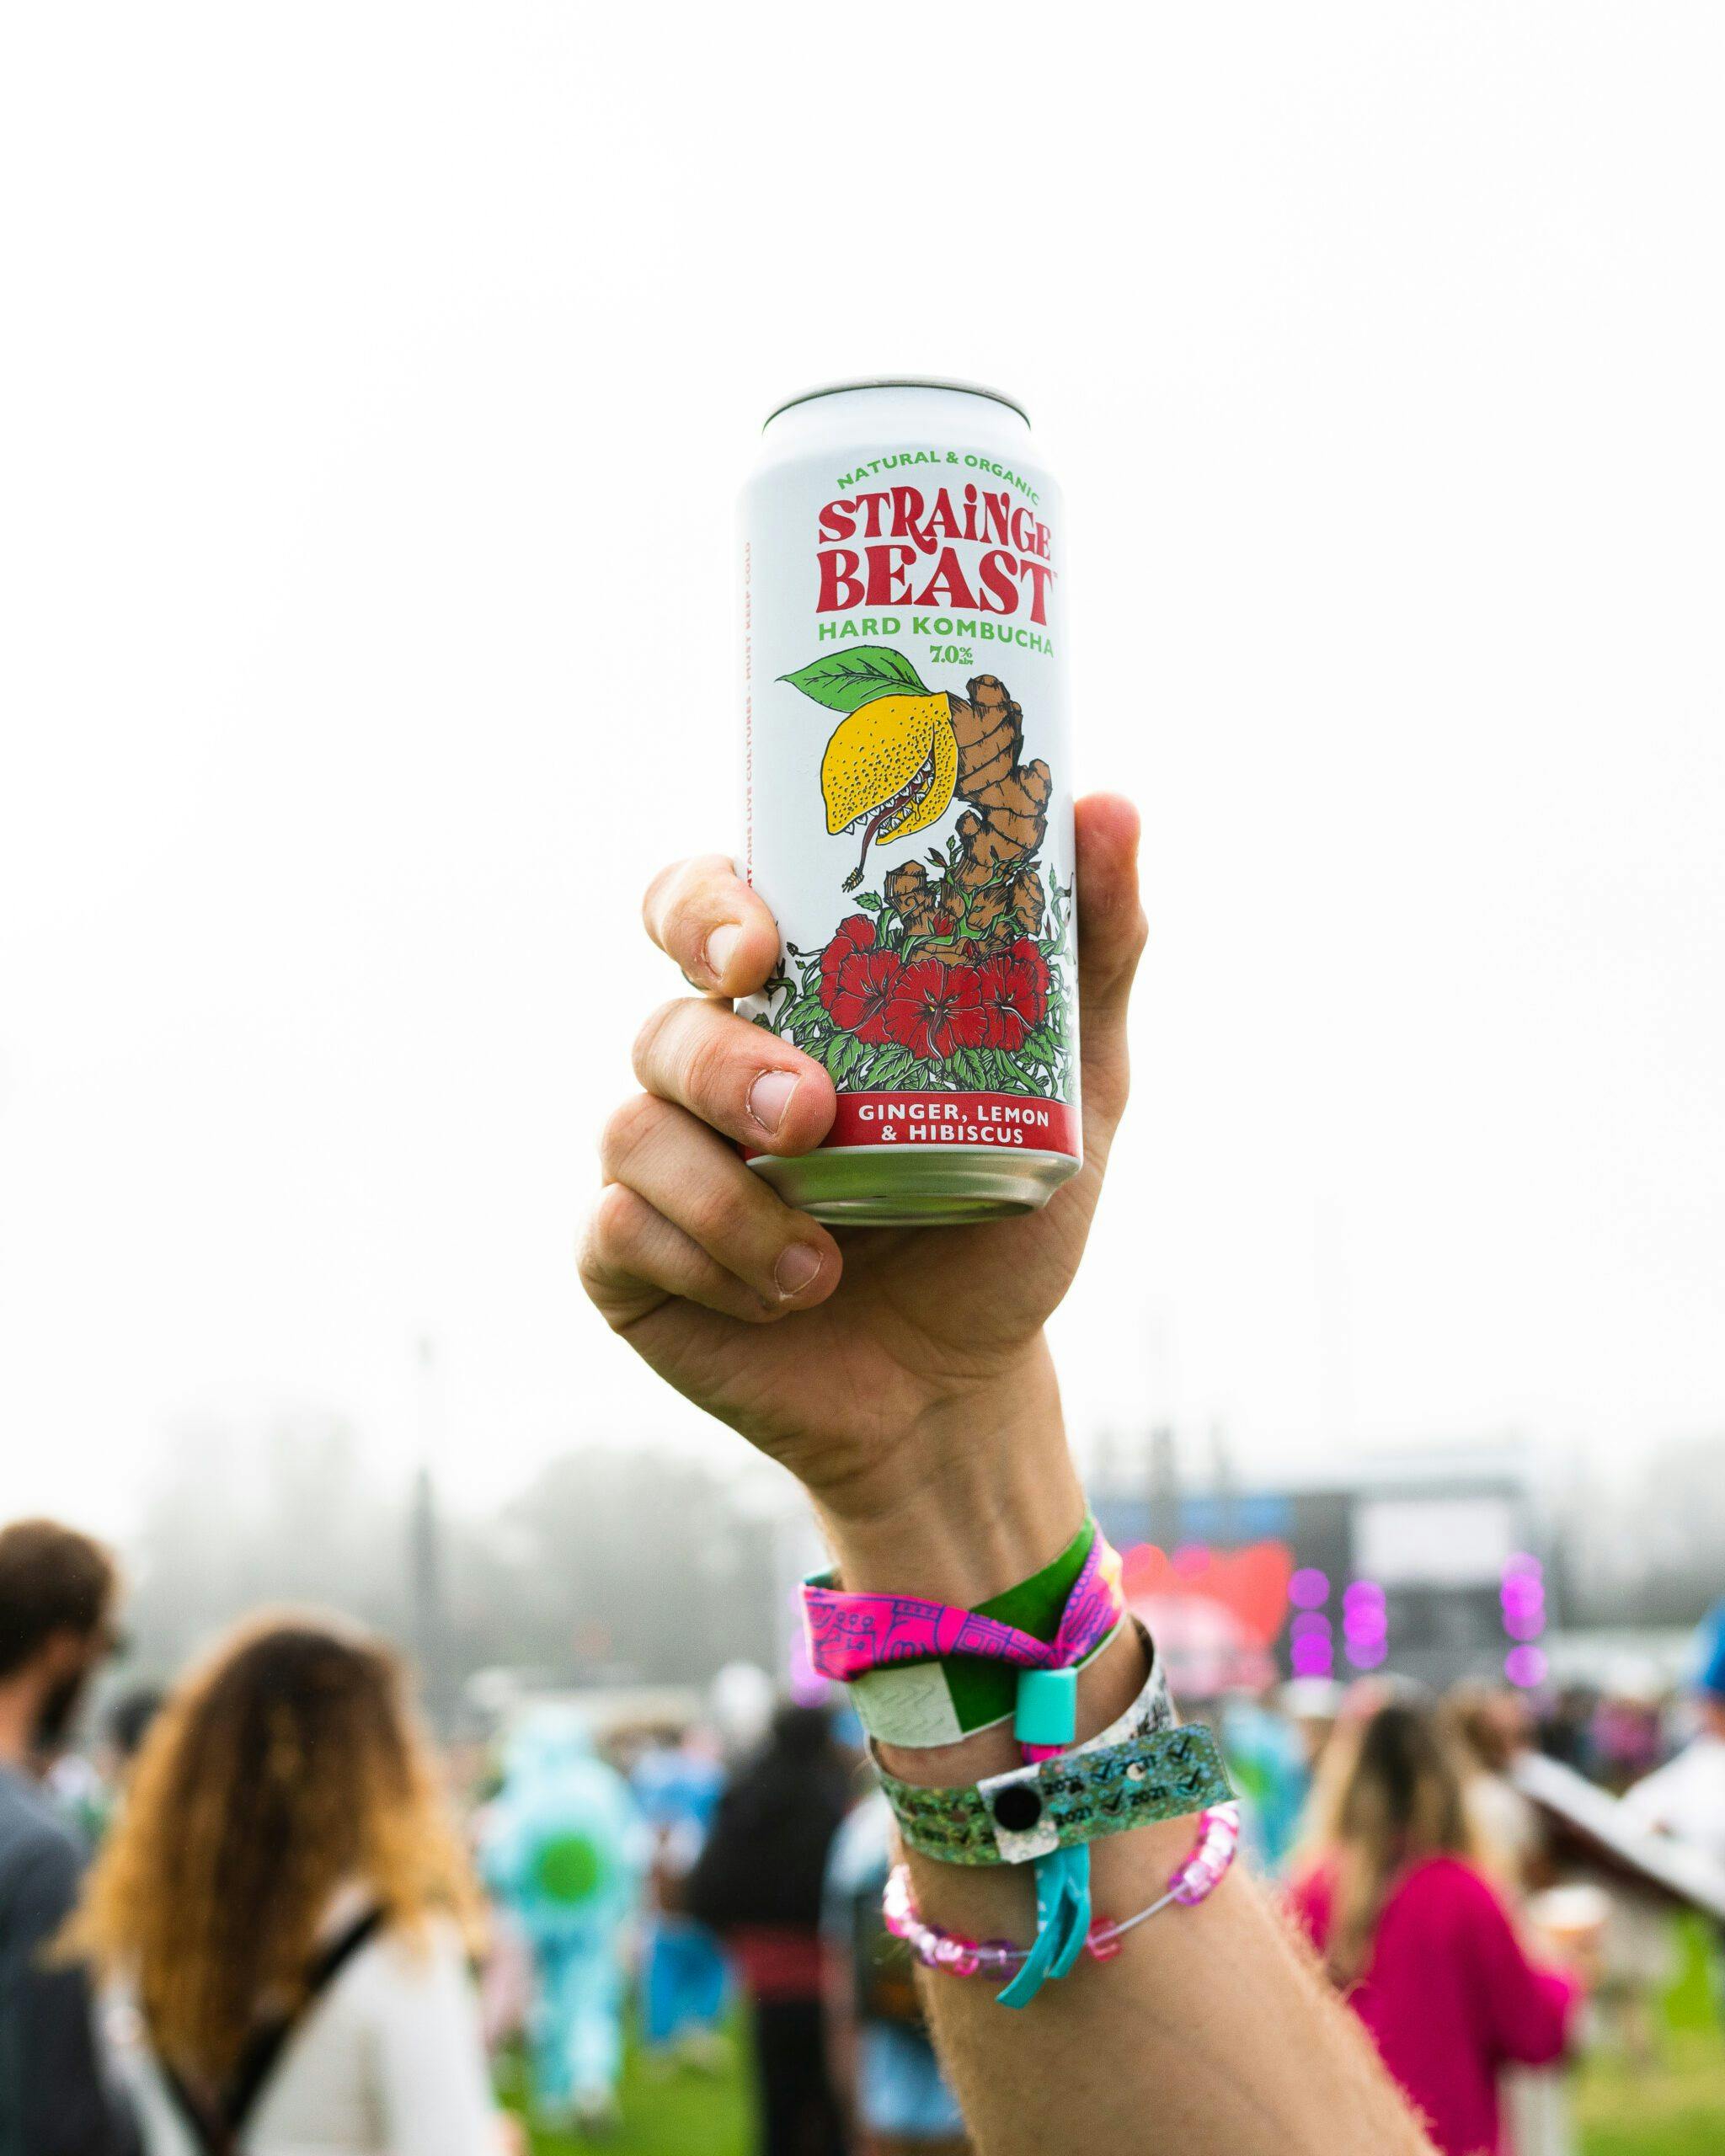 Person in a crowd holding a can of Strainge Beasts Ginger, Lemon & Hibiscus hard kombucha